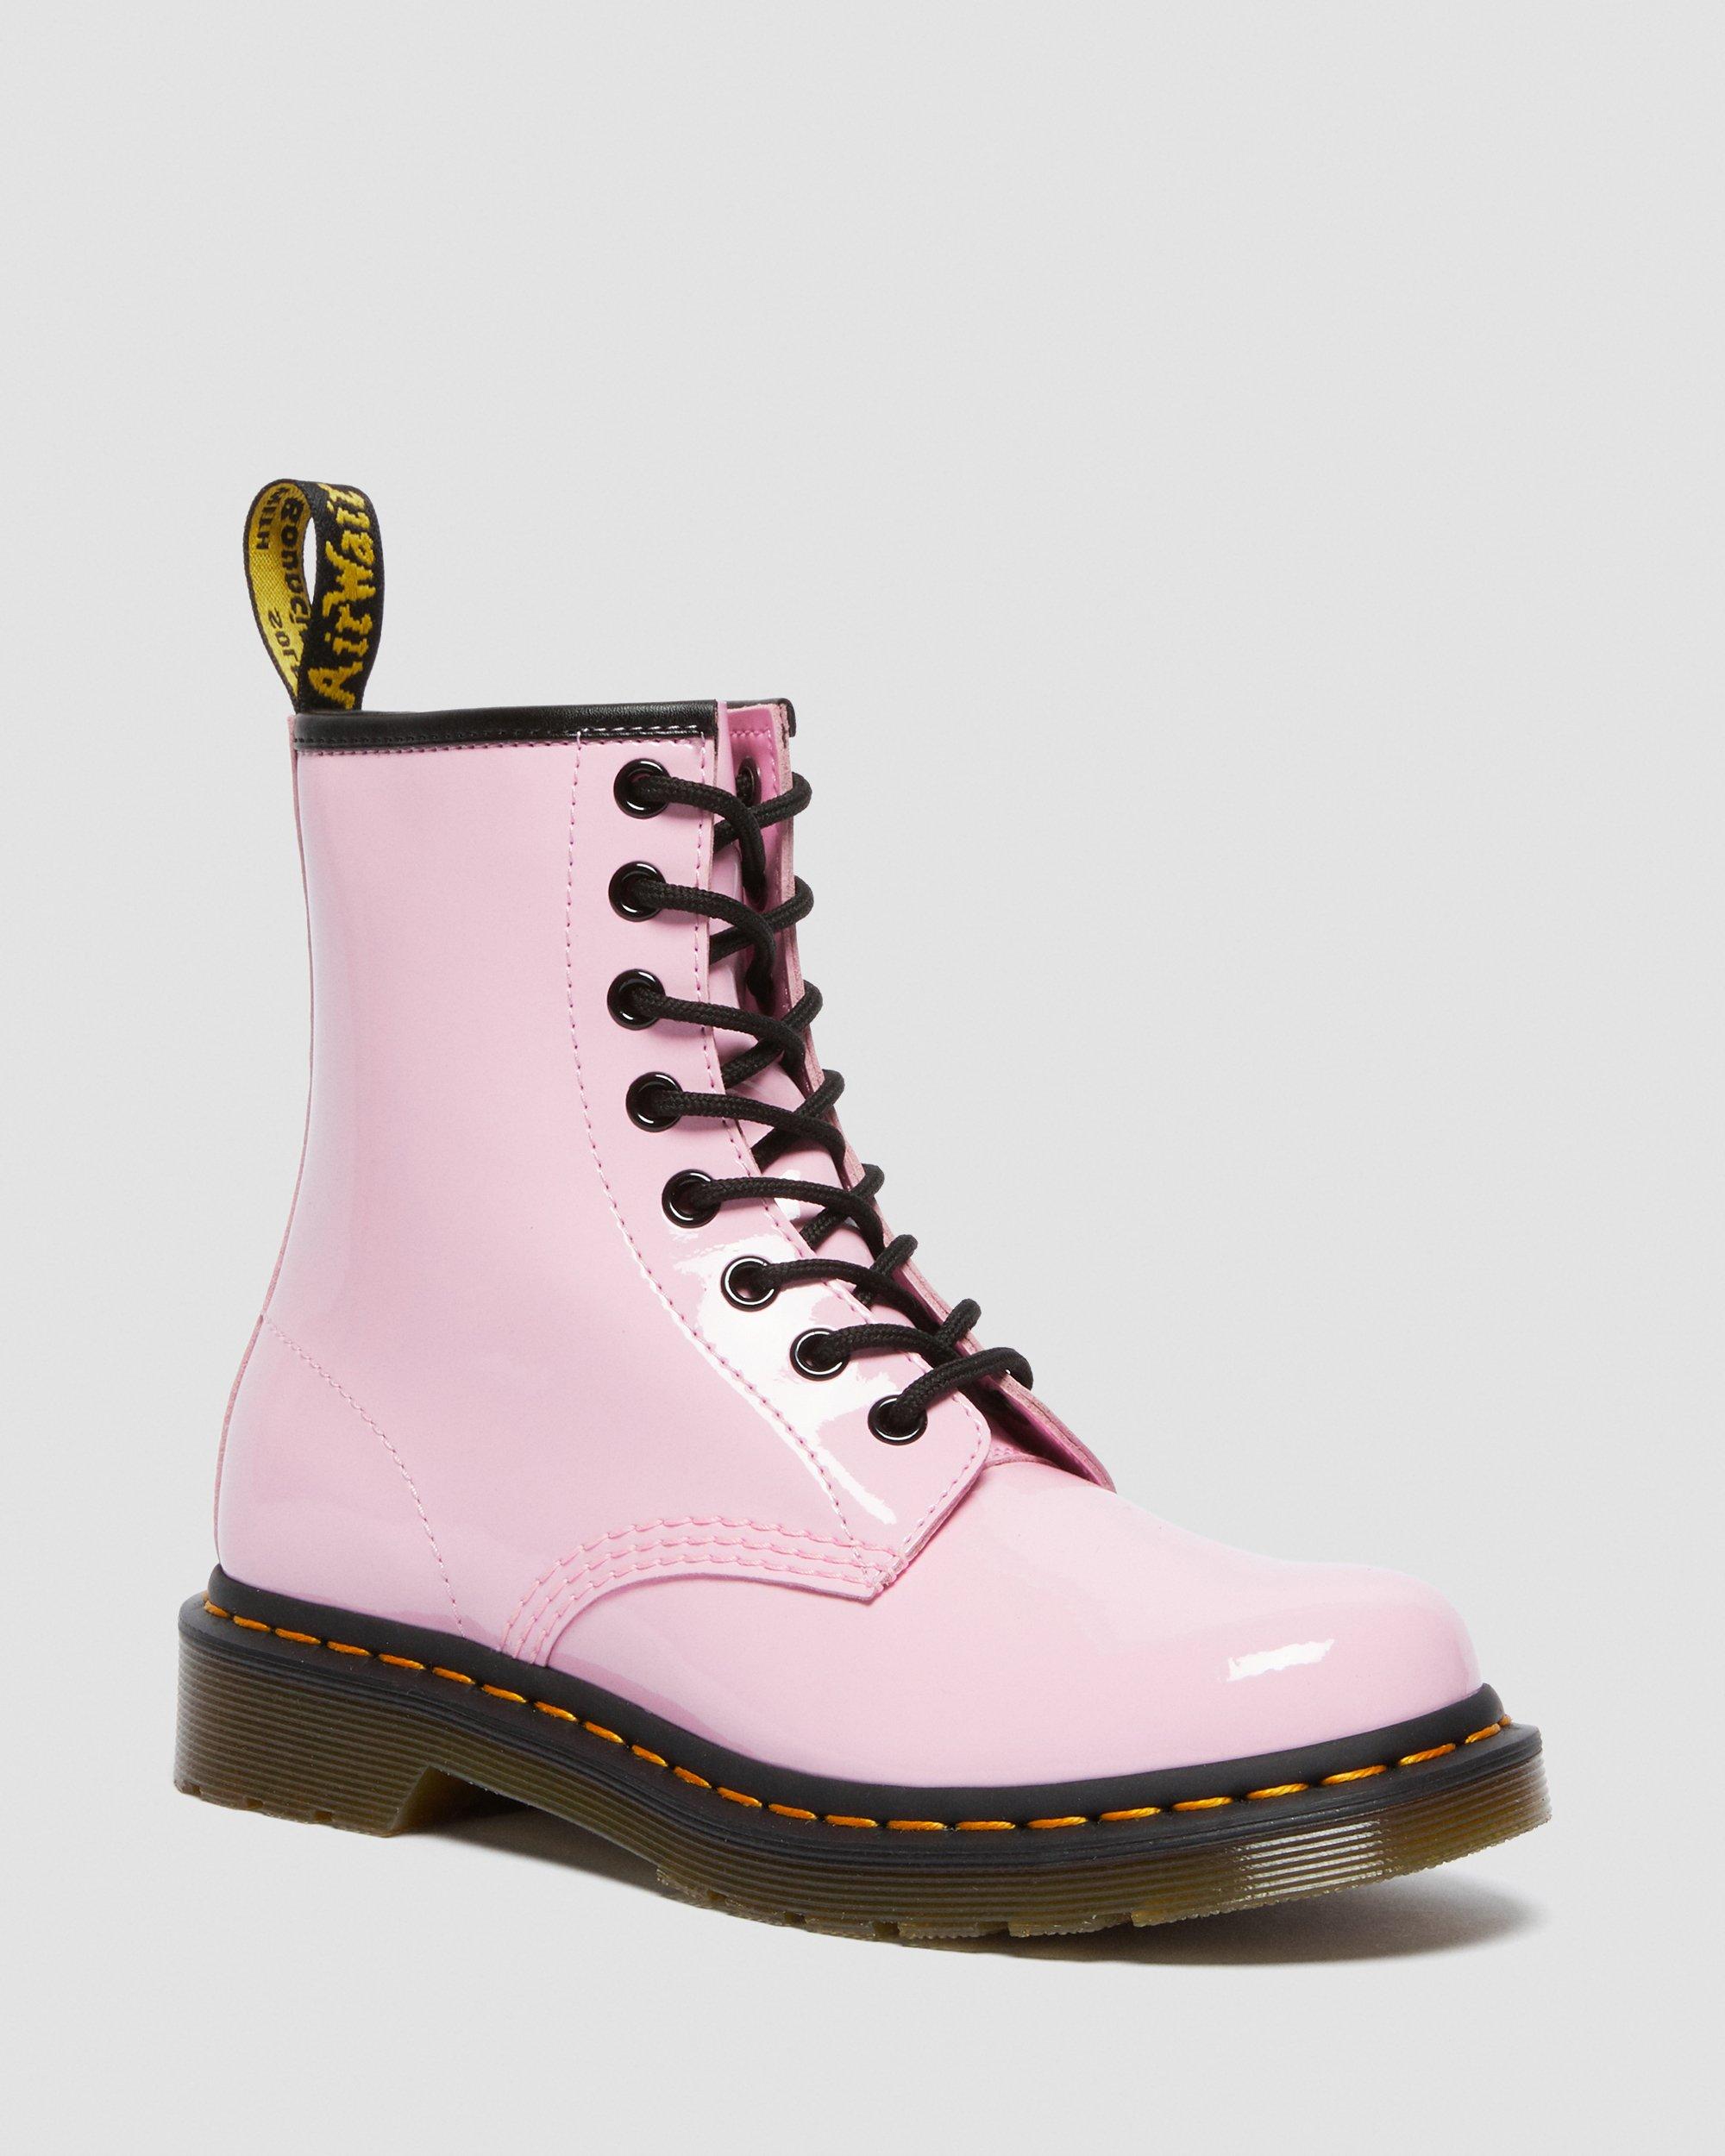 1460 Patent Leather Lace Up Boots in Pale Pink | Dr. Martens